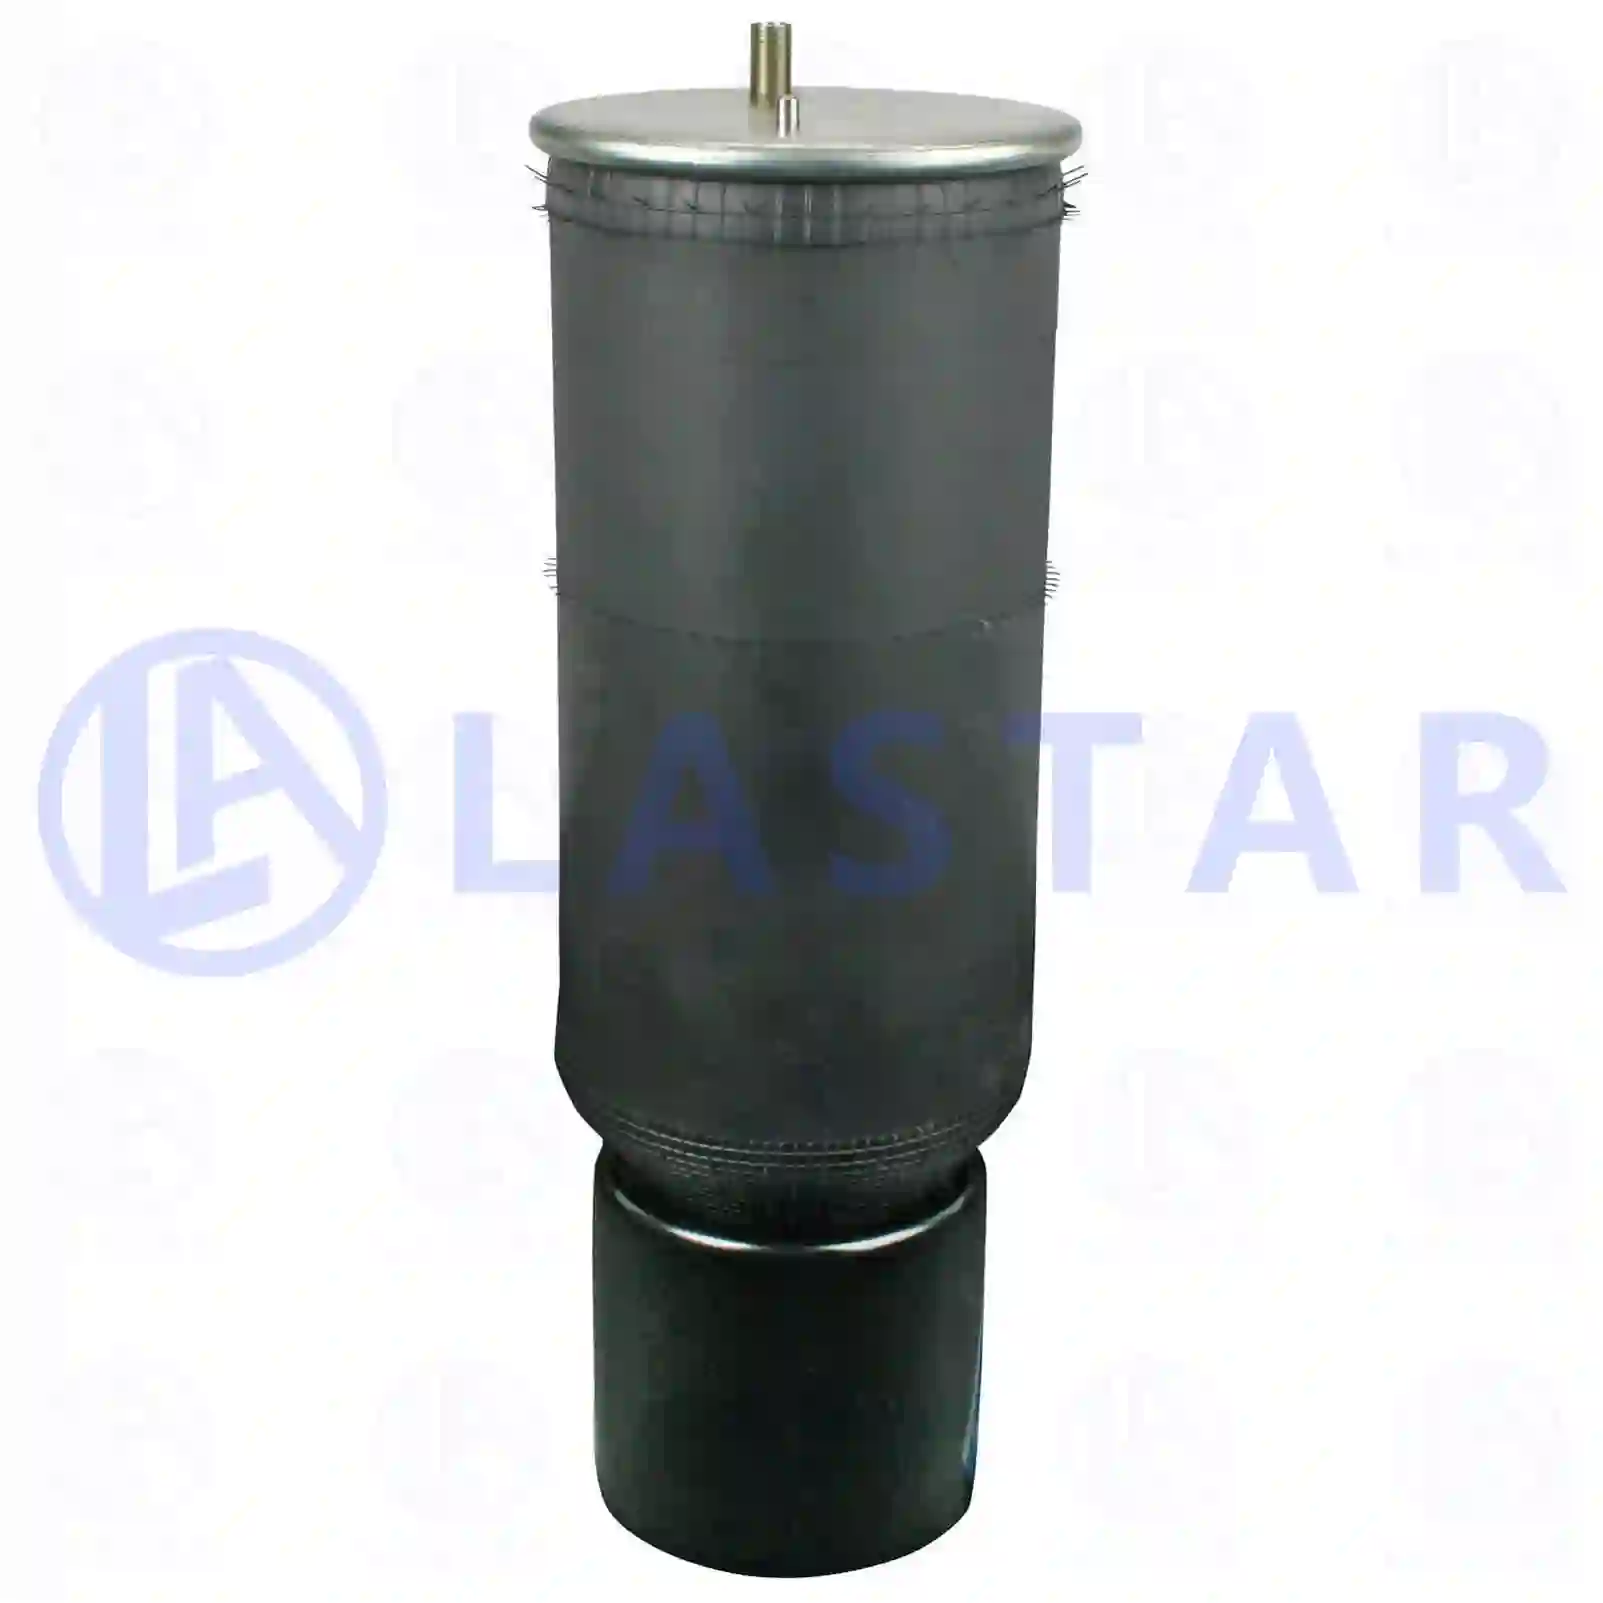 Air spring, with steel piston, 77728911, 5010600328, 7421978494, 20726768, 21978504, ZG40789-0008 ||  77728911 Lastar Spare Part | Truck Spare Parts, Auotomotive Spare Parts Air spring, with steel piston, 77728911, 5010600328, 7421978494, 20726768, 21978504, ZG40789-0008 ||  77728911 Lastar Spare Part | Truck Spare Parts, Auotomotive Spare Parts